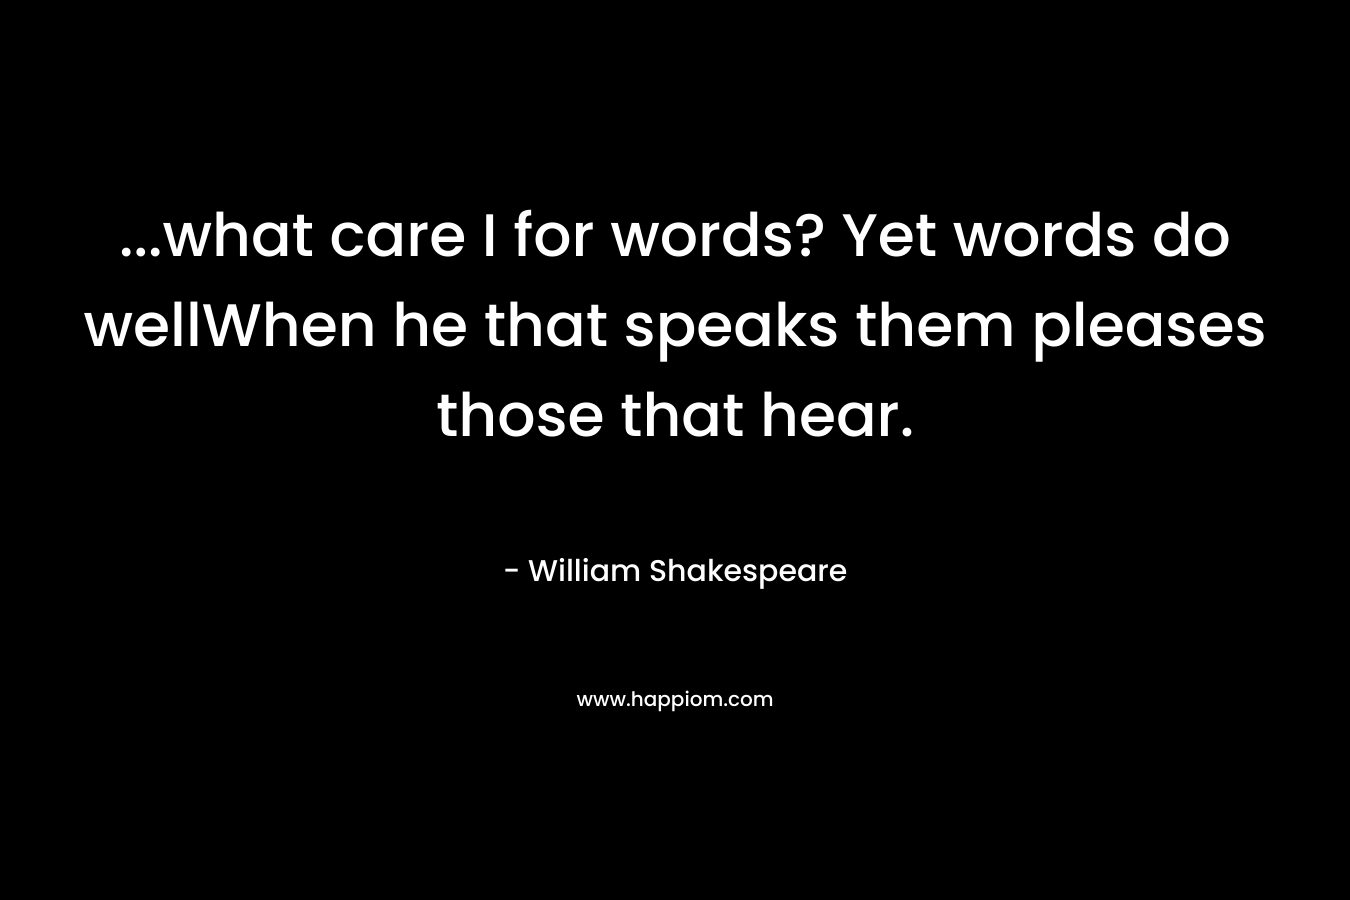 ...what care I for words? Yet words do wellWhen he that speaks them pleases those that hear.